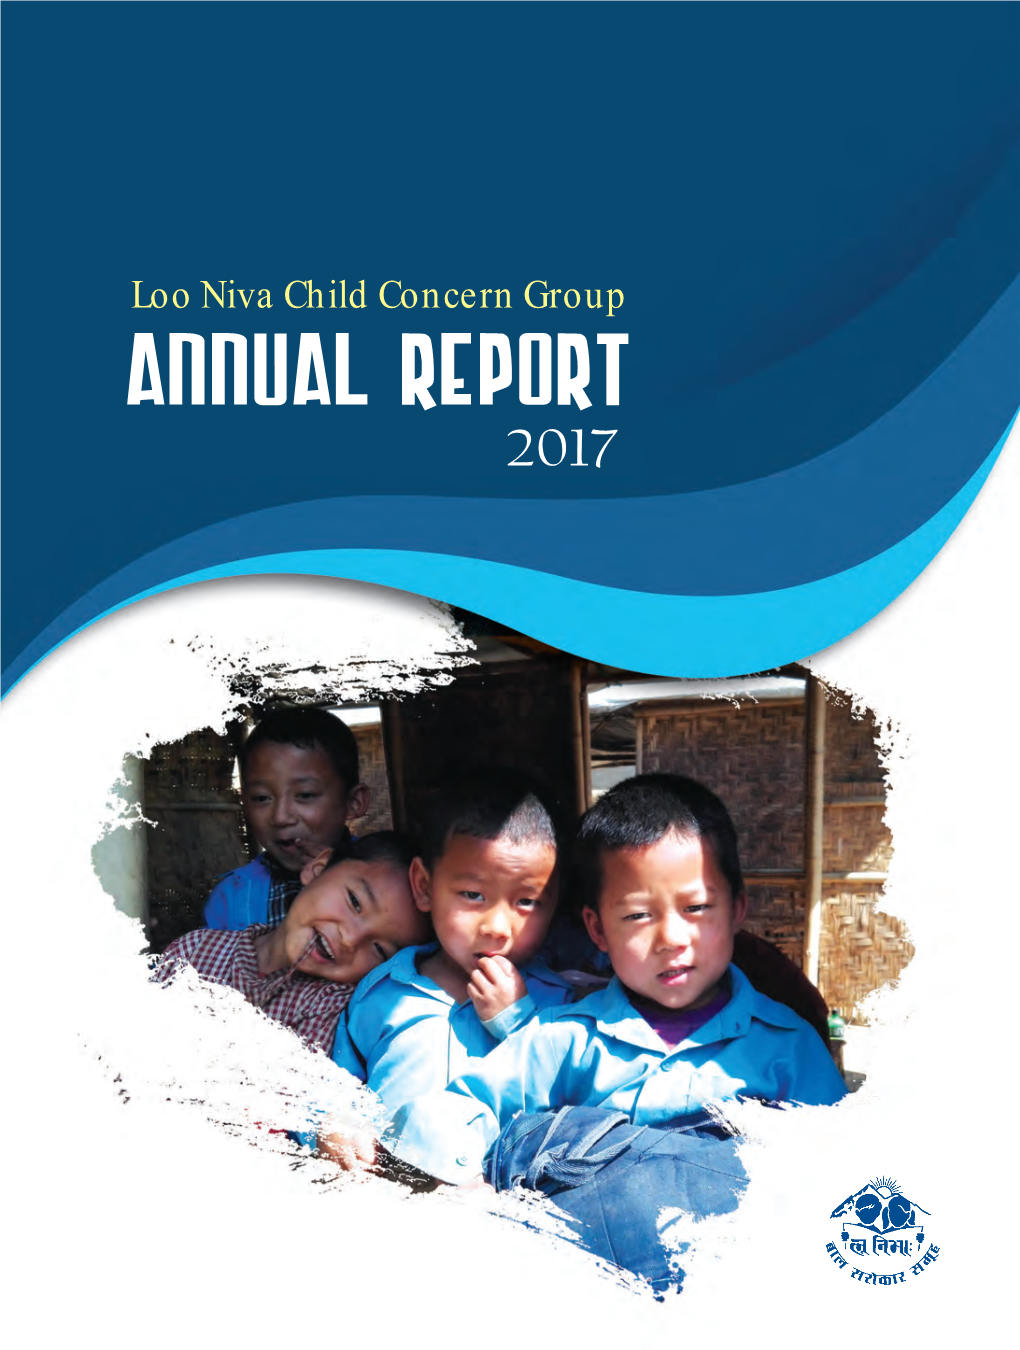 ANNUAL REPORT 2017 Loo Niva Introduction in 1994, a Oup of Oung Ol the Vision: a Ous Nepal Ed a 'S Ary in Their Ery D and Outh S Her/His Age of Gr Ana, Y